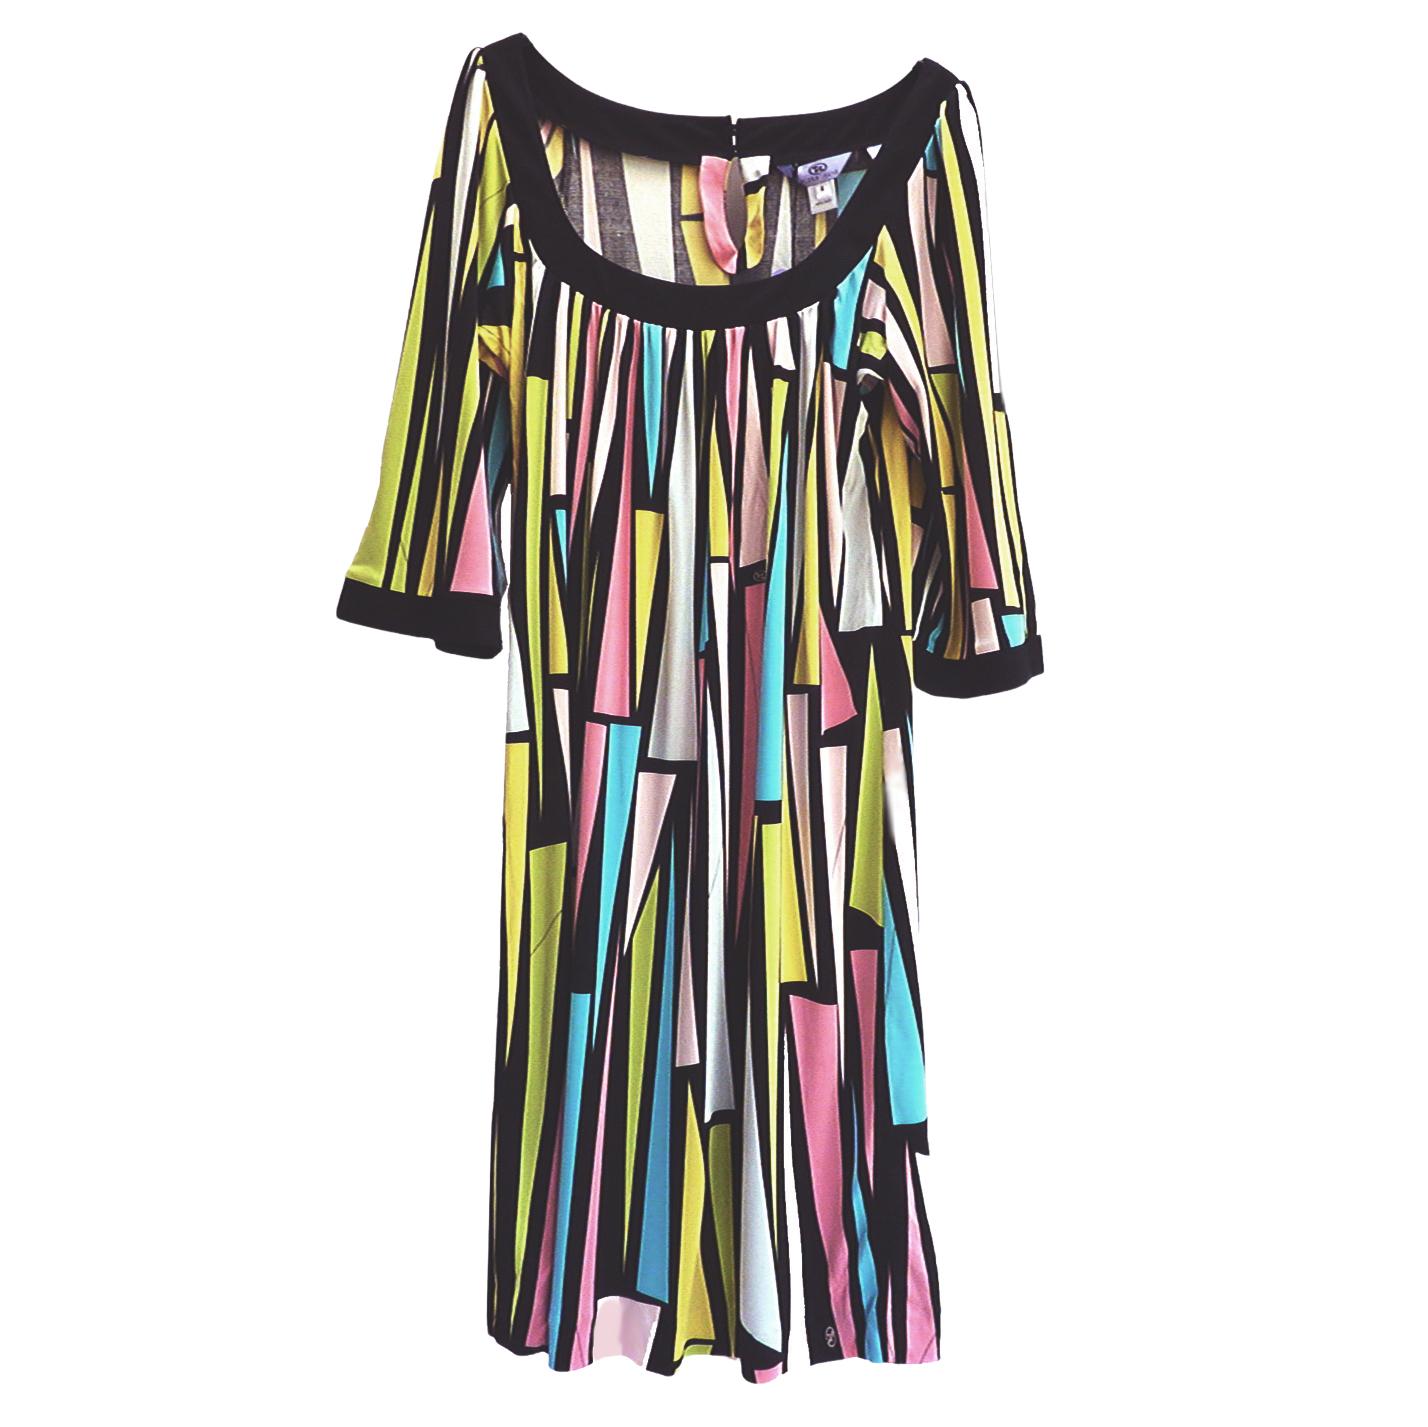 Flattering easy dress that can be dressed up or down.
(Psst ... This is the same FLORA KUNG style that Kate Middleton wore to Annabel's London but in a different print) 
Approximately 39